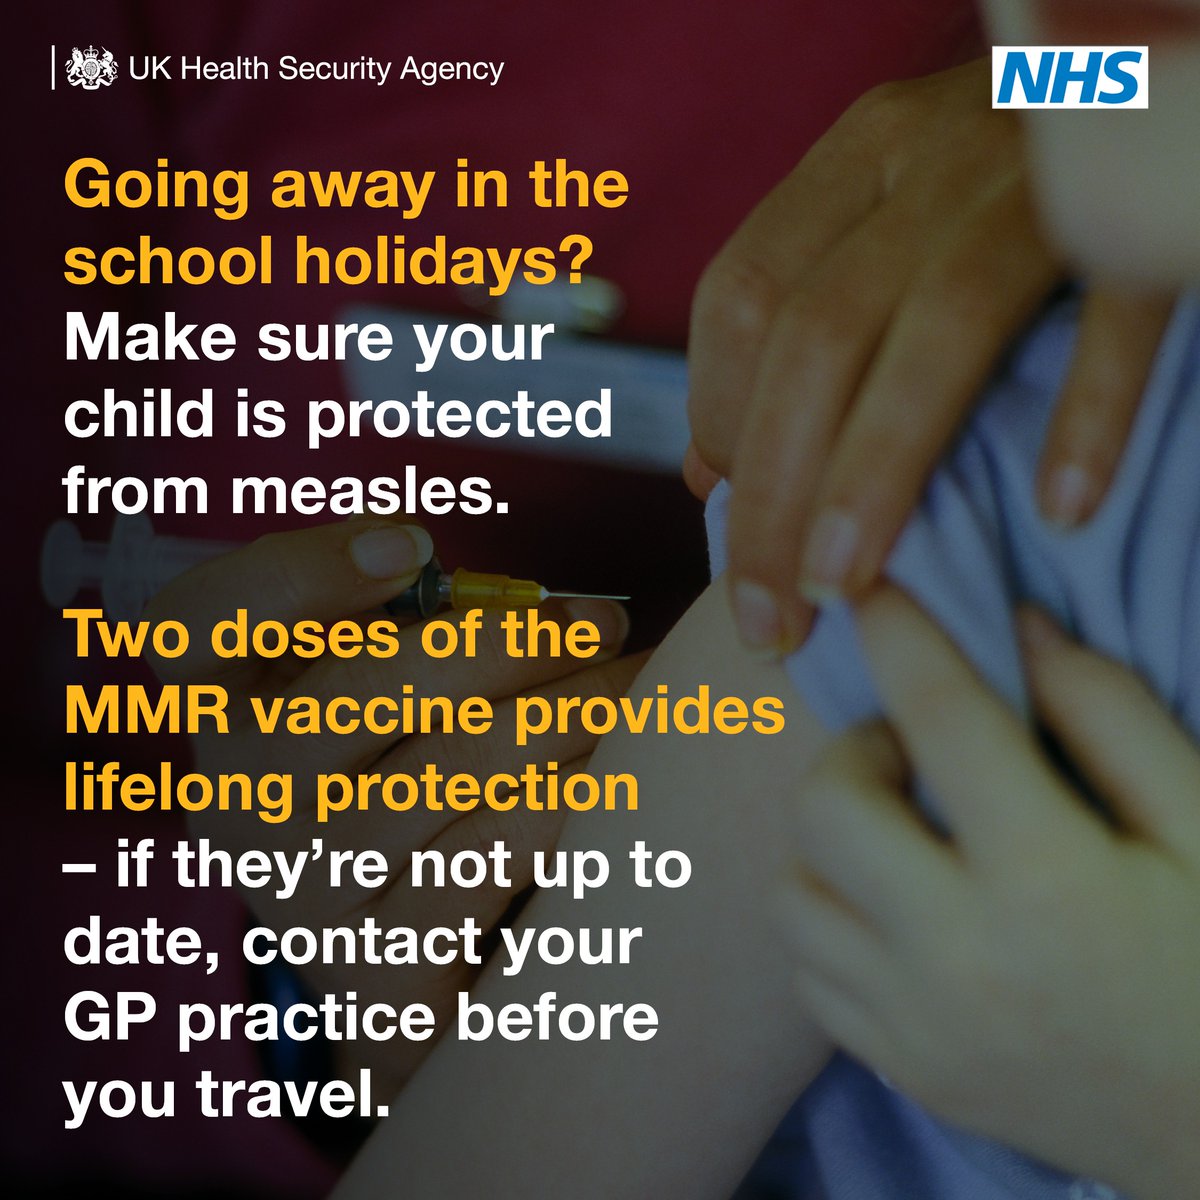 If you’re planning to travel abroad during the school holidays, make sure to check your child is up to date with their vaccinations, including the #MMR vaccine. Contact your GP practice to book any catch up jabs before you travel ✈🚢🚉